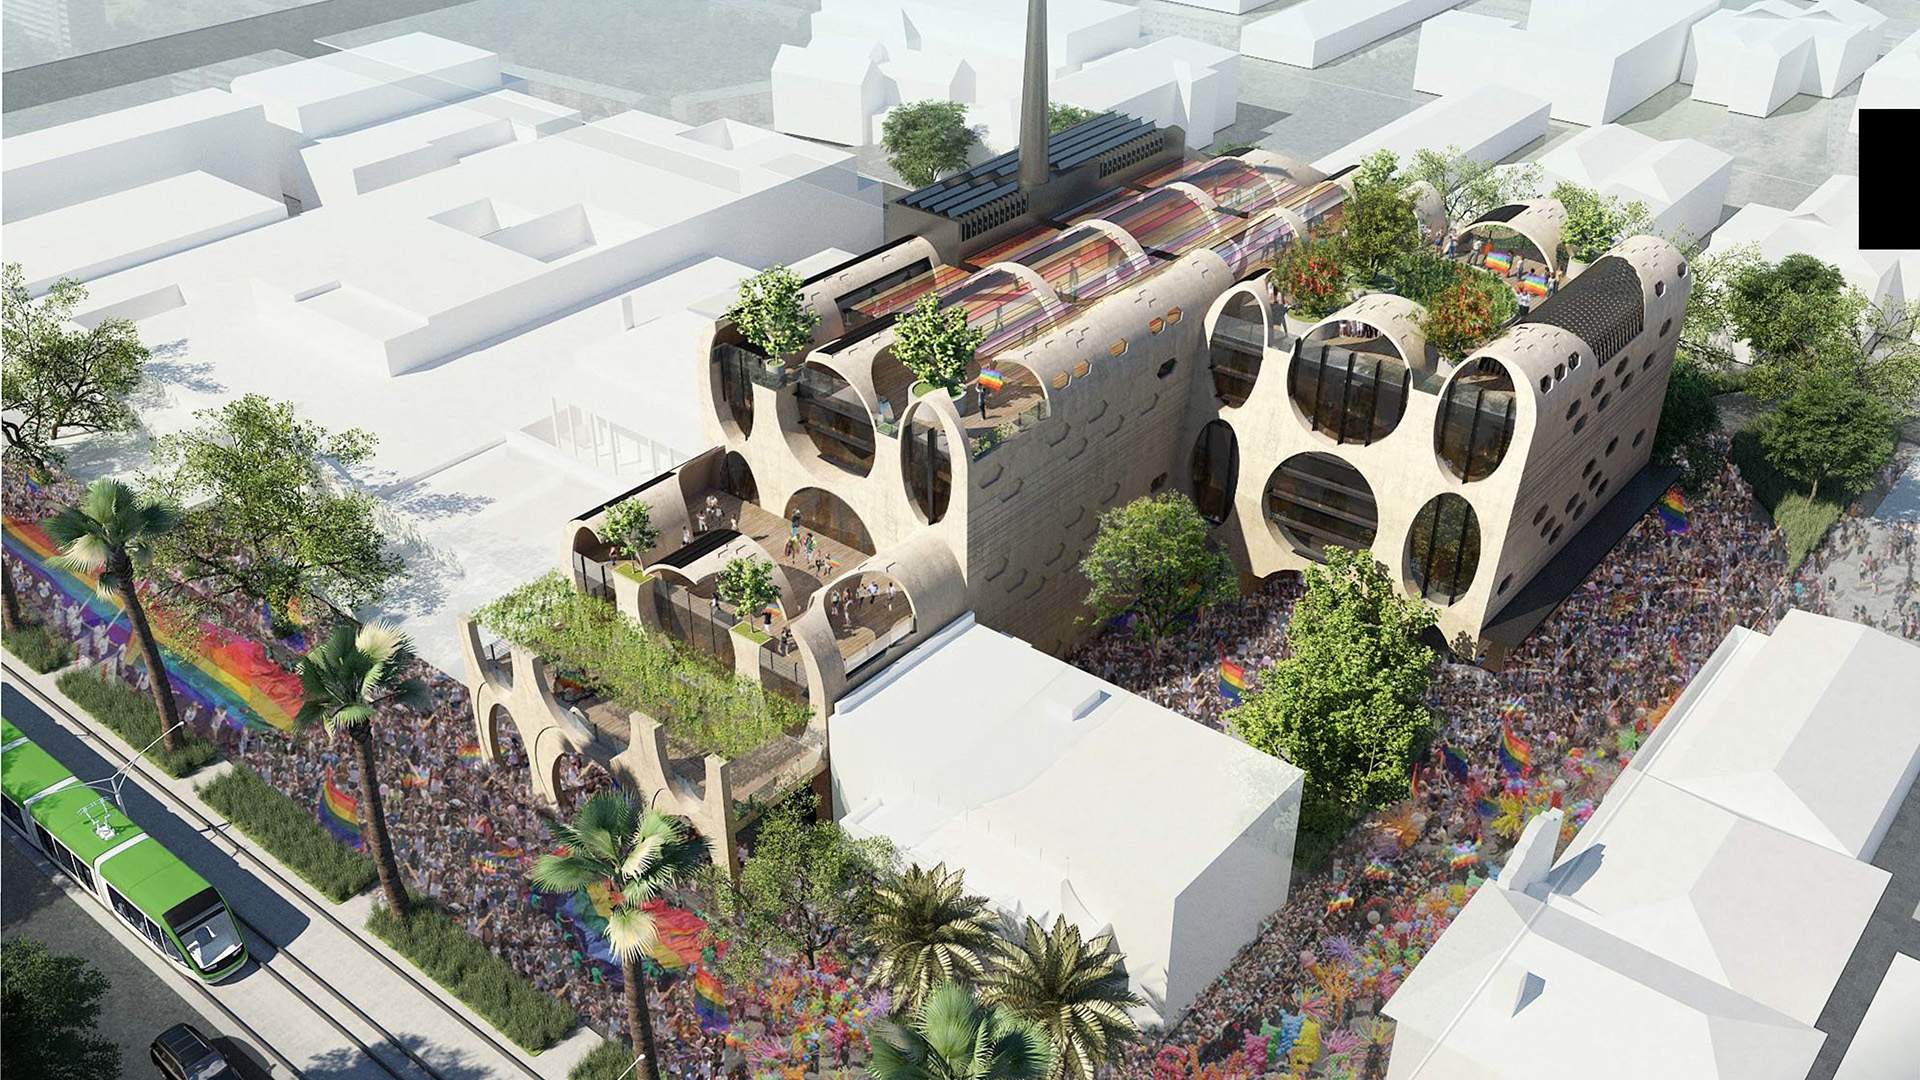 The Designs for Australia's First Pride Centre Have Been Revealed